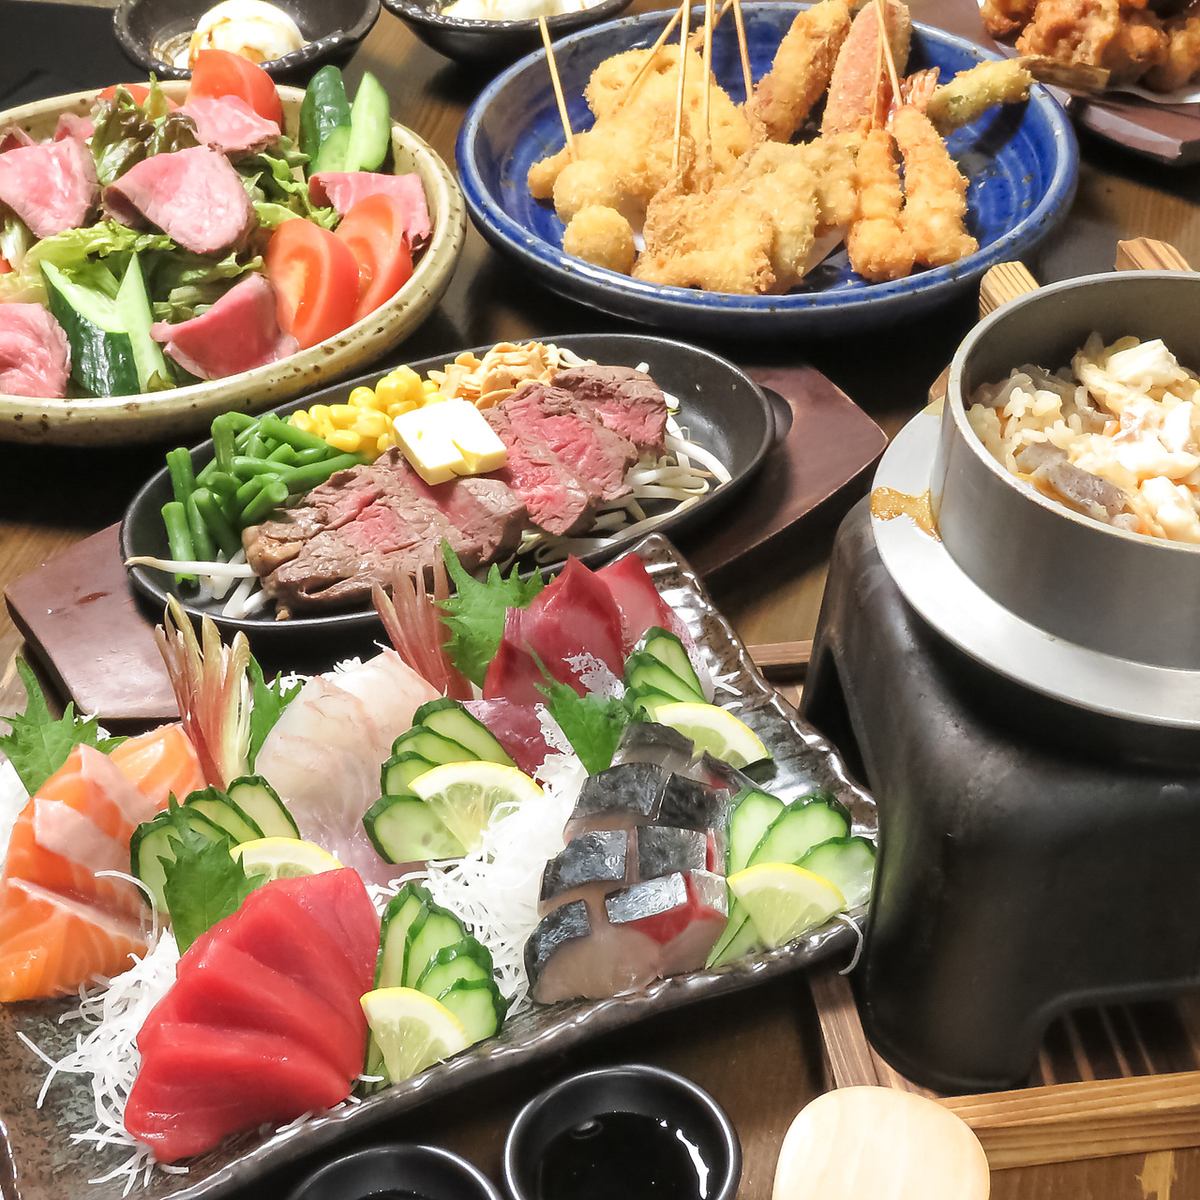 If you're looking for seafood in Tenma, head to our restaurant! We take pride in our freshness and prices! All-you-can-drink banquet course starts at 4,400 yen